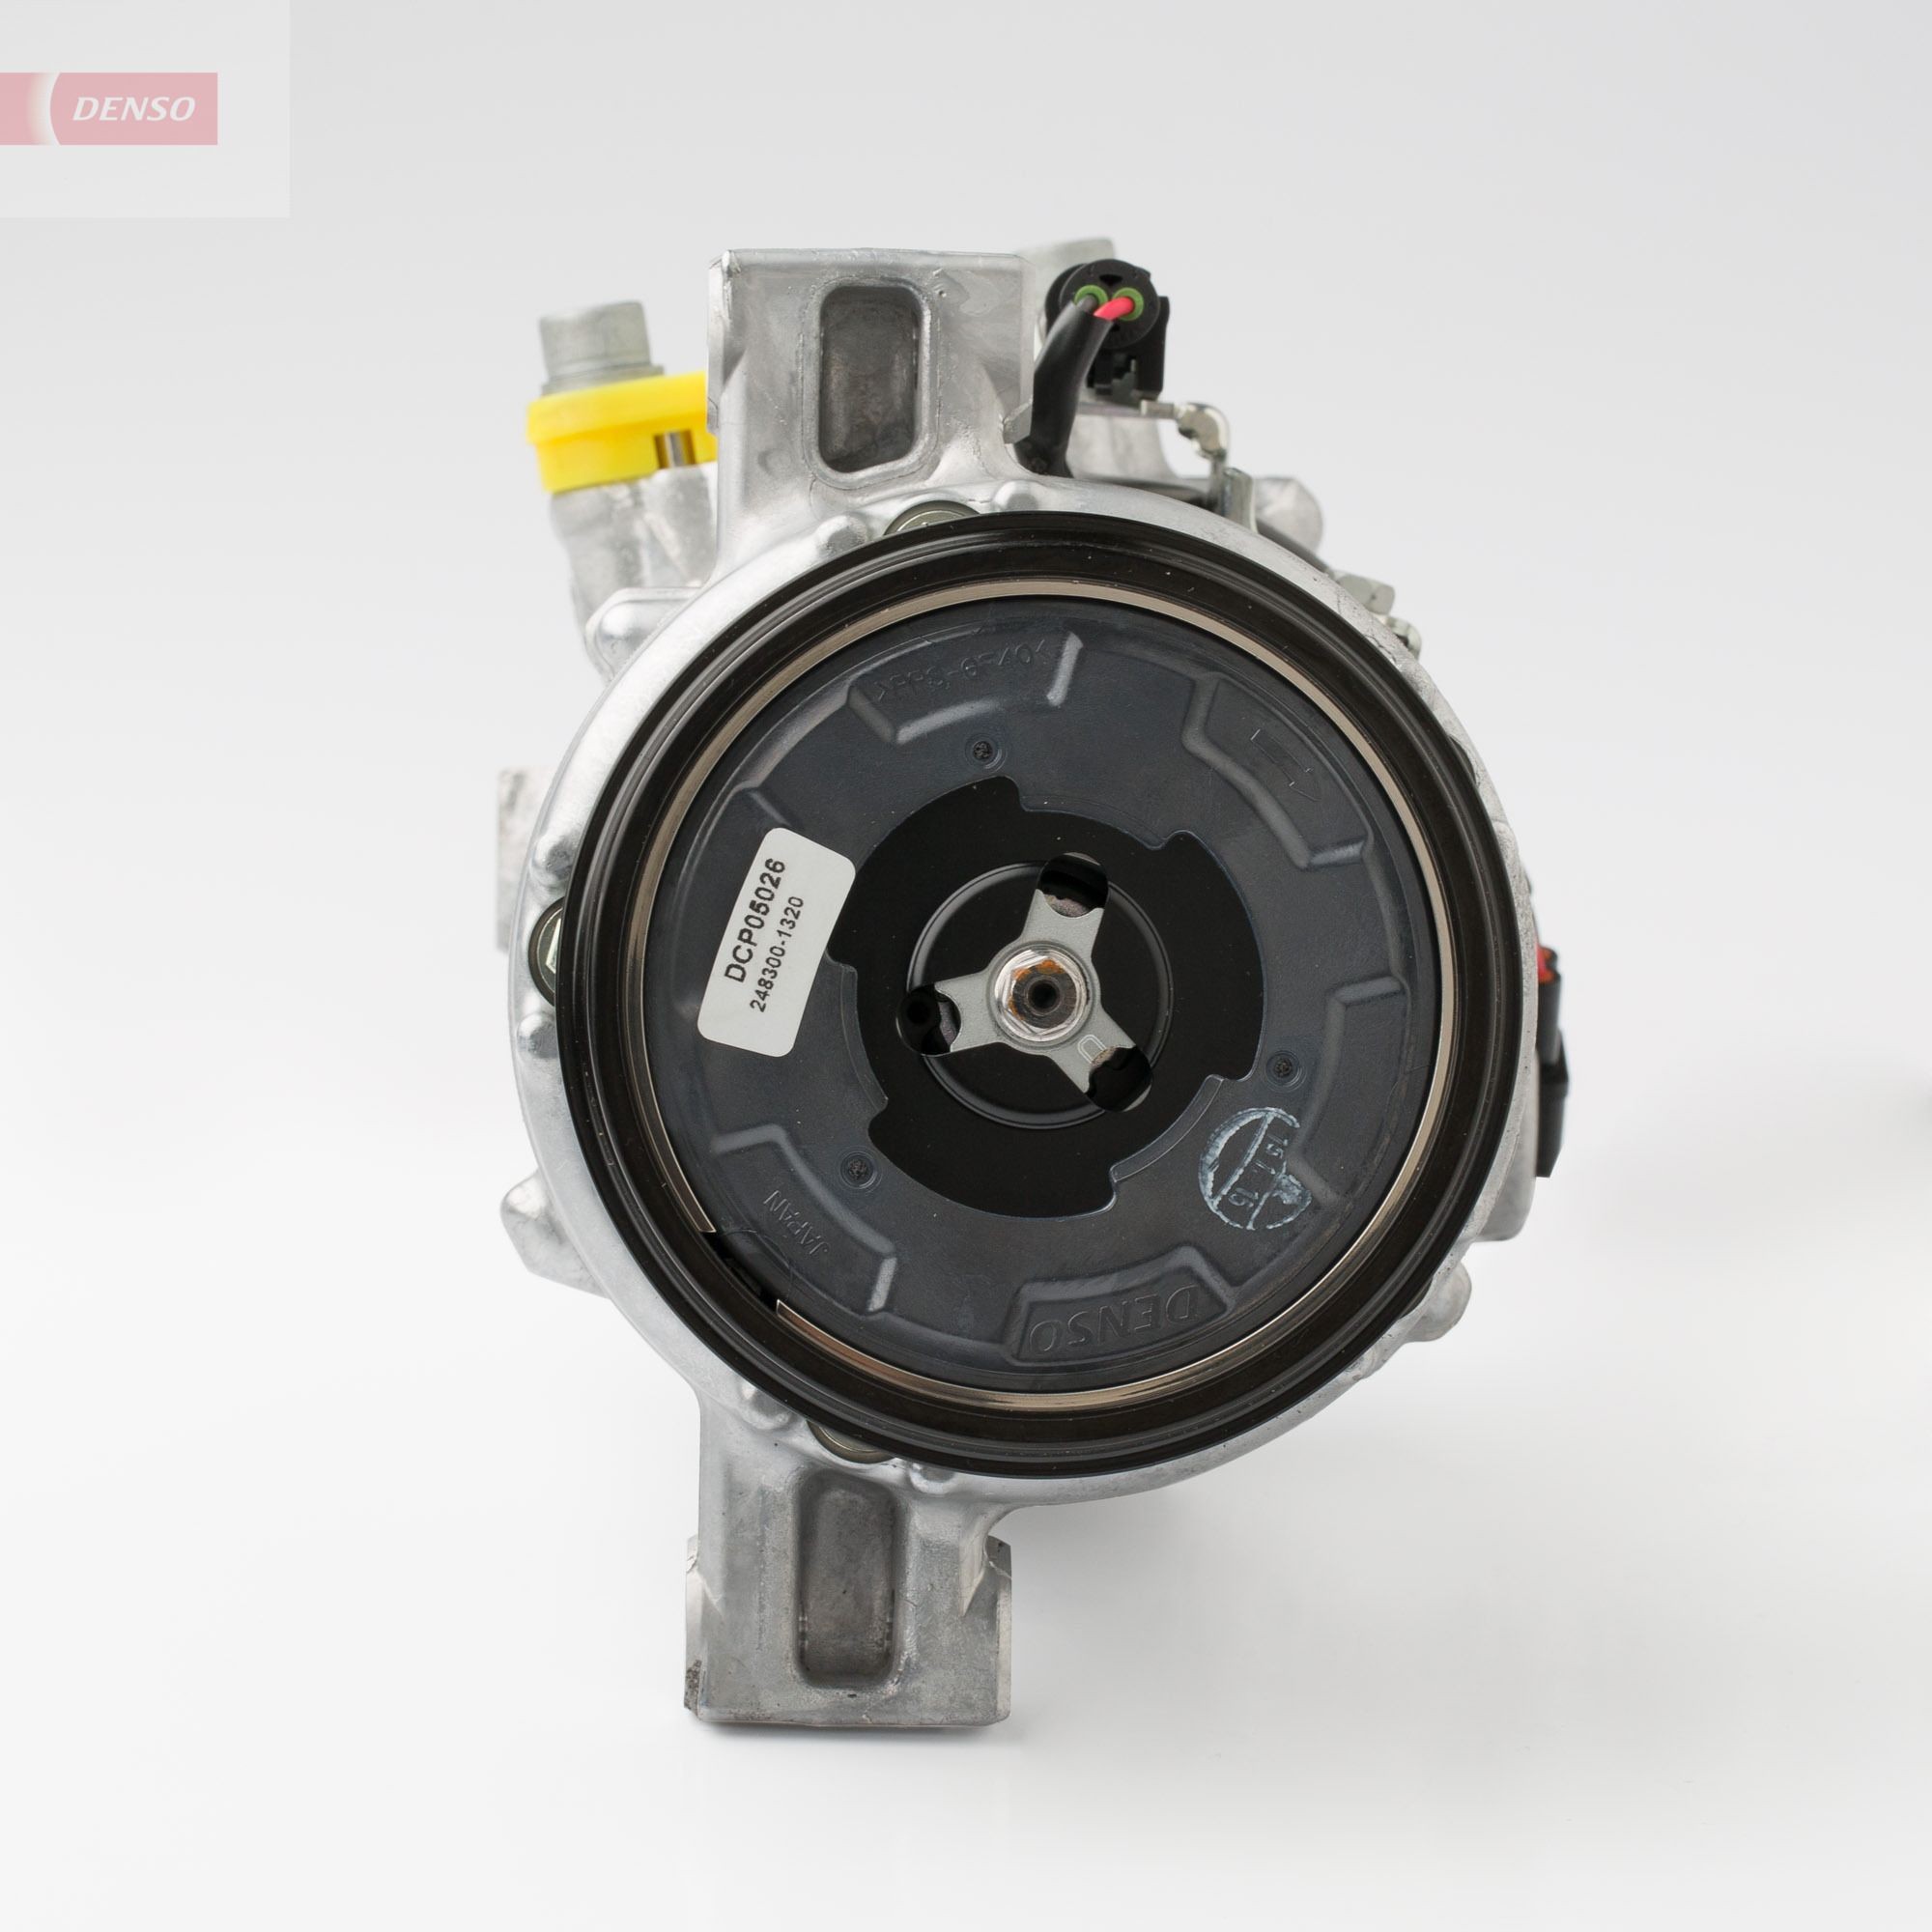 DENSO Air con compressor DCP05026 for BMW 3 Series, 1 Series